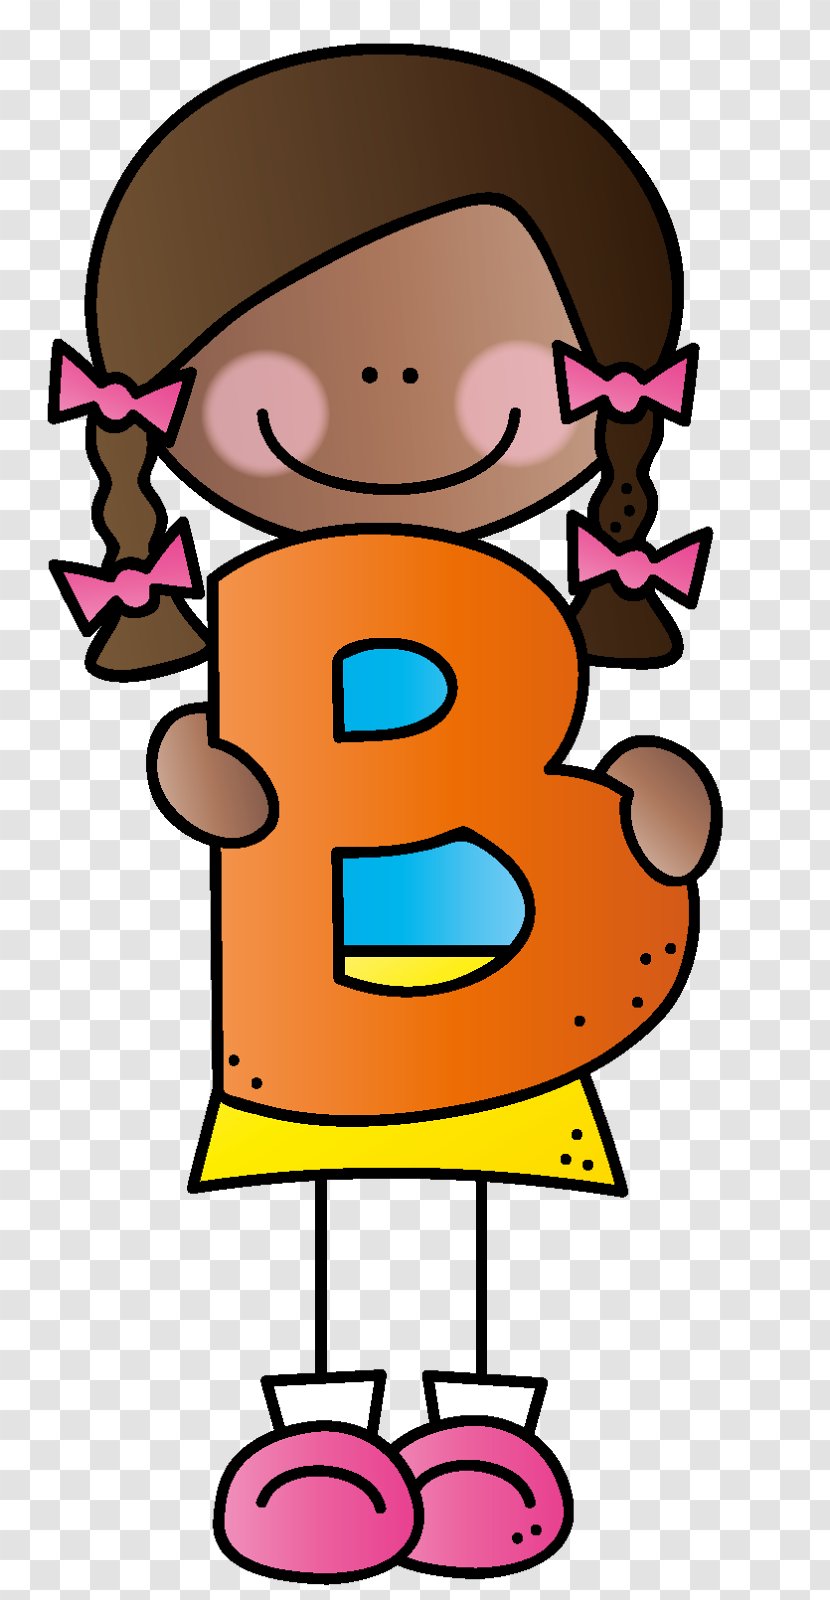 Alphabet Letter Orthography X - B - BUFALO Transparent PNG